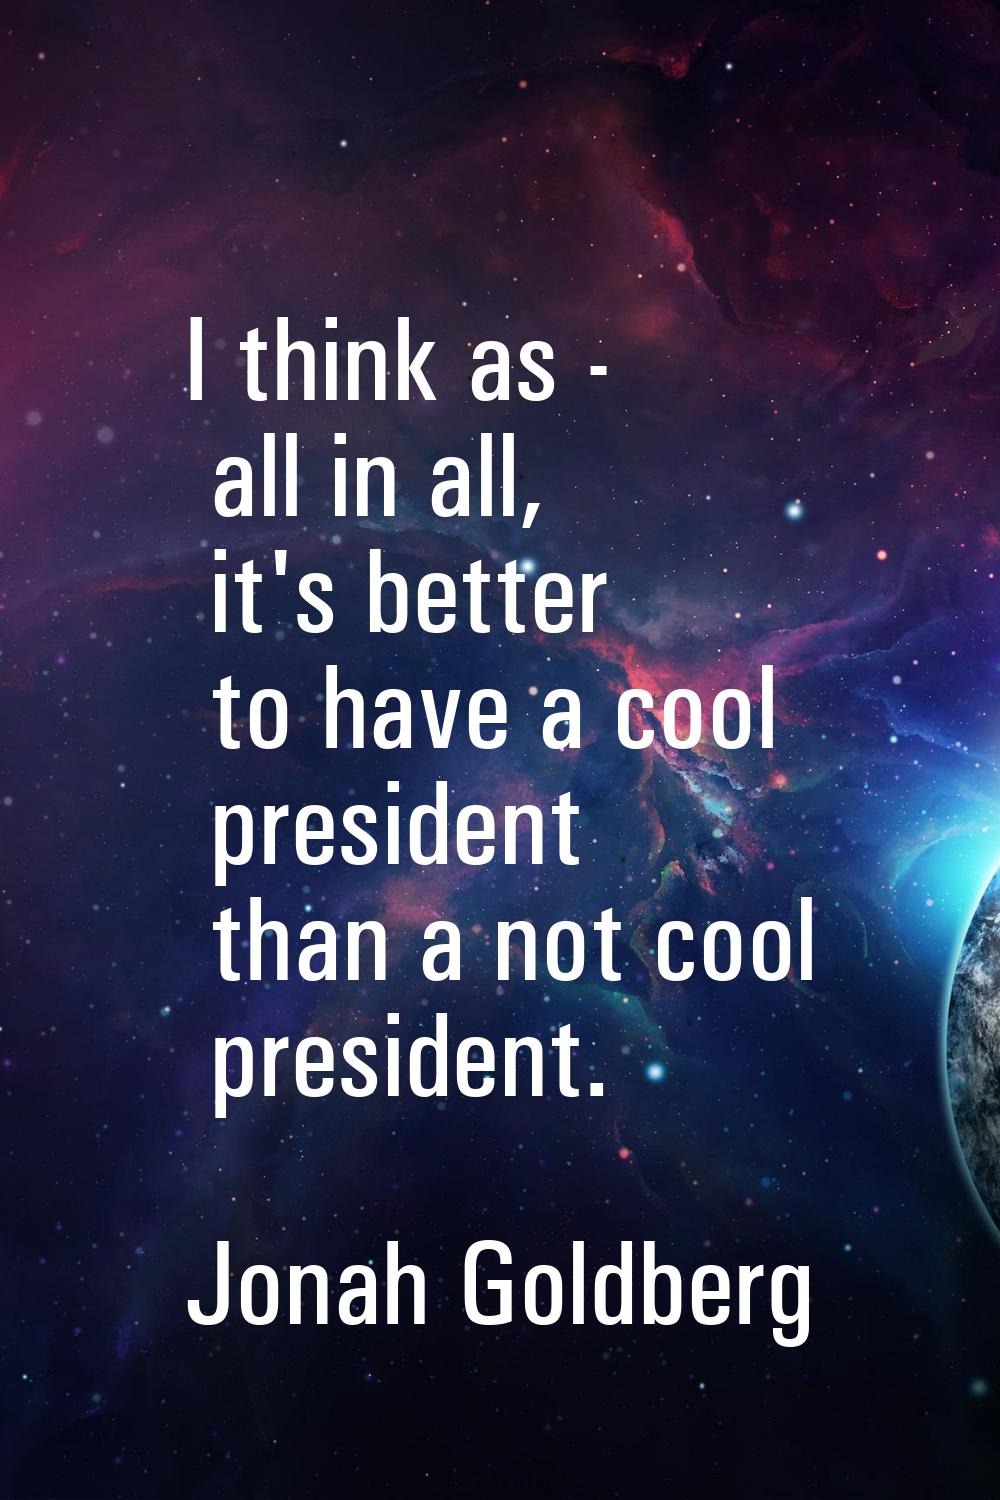 I think as - all in all, it's better to have a cool president than a not cool president.